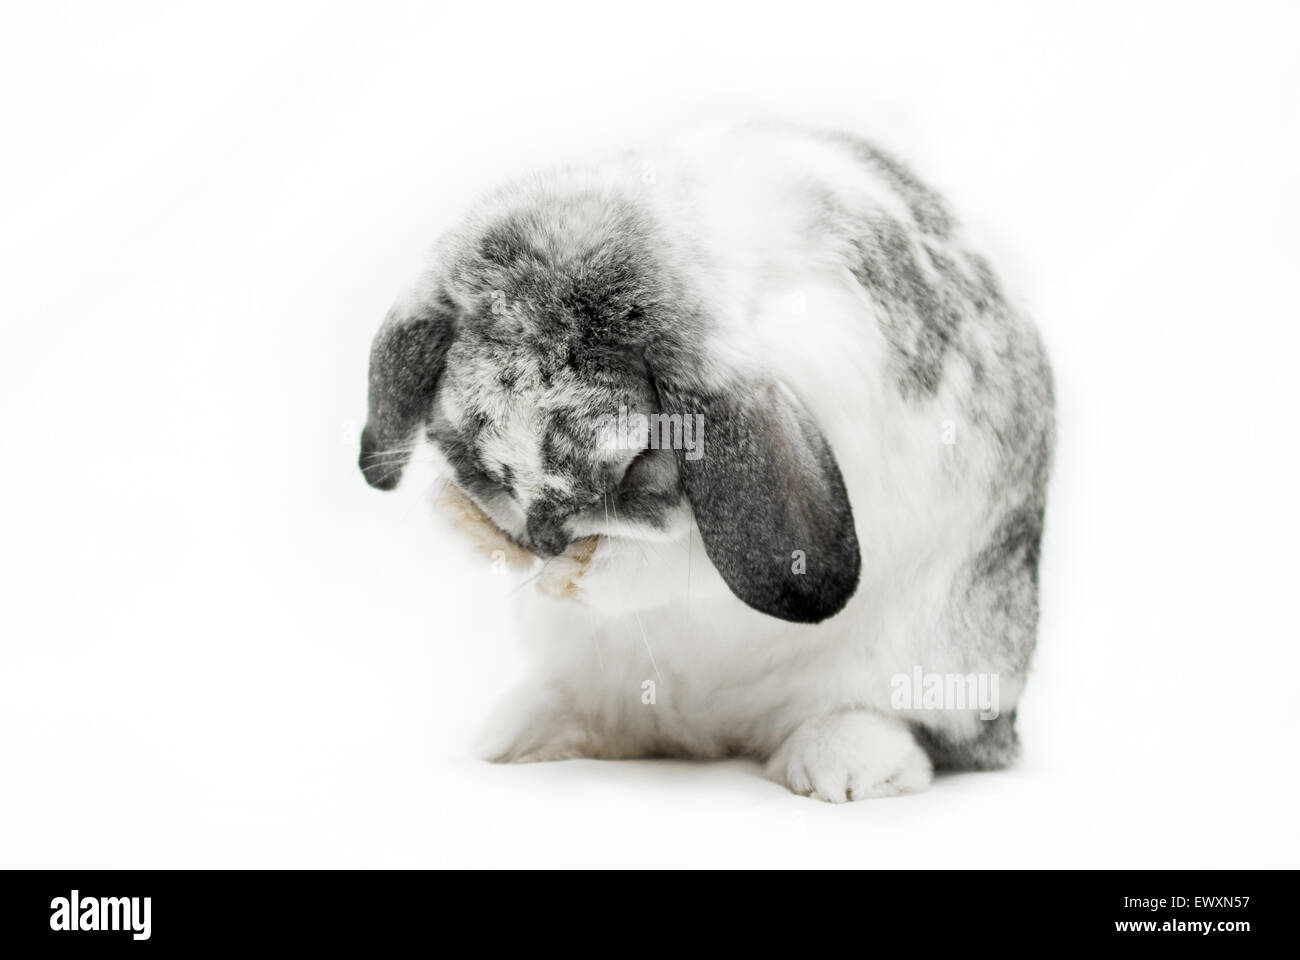 Grey and white lop eared rabbit cleaning itself Stock Photo